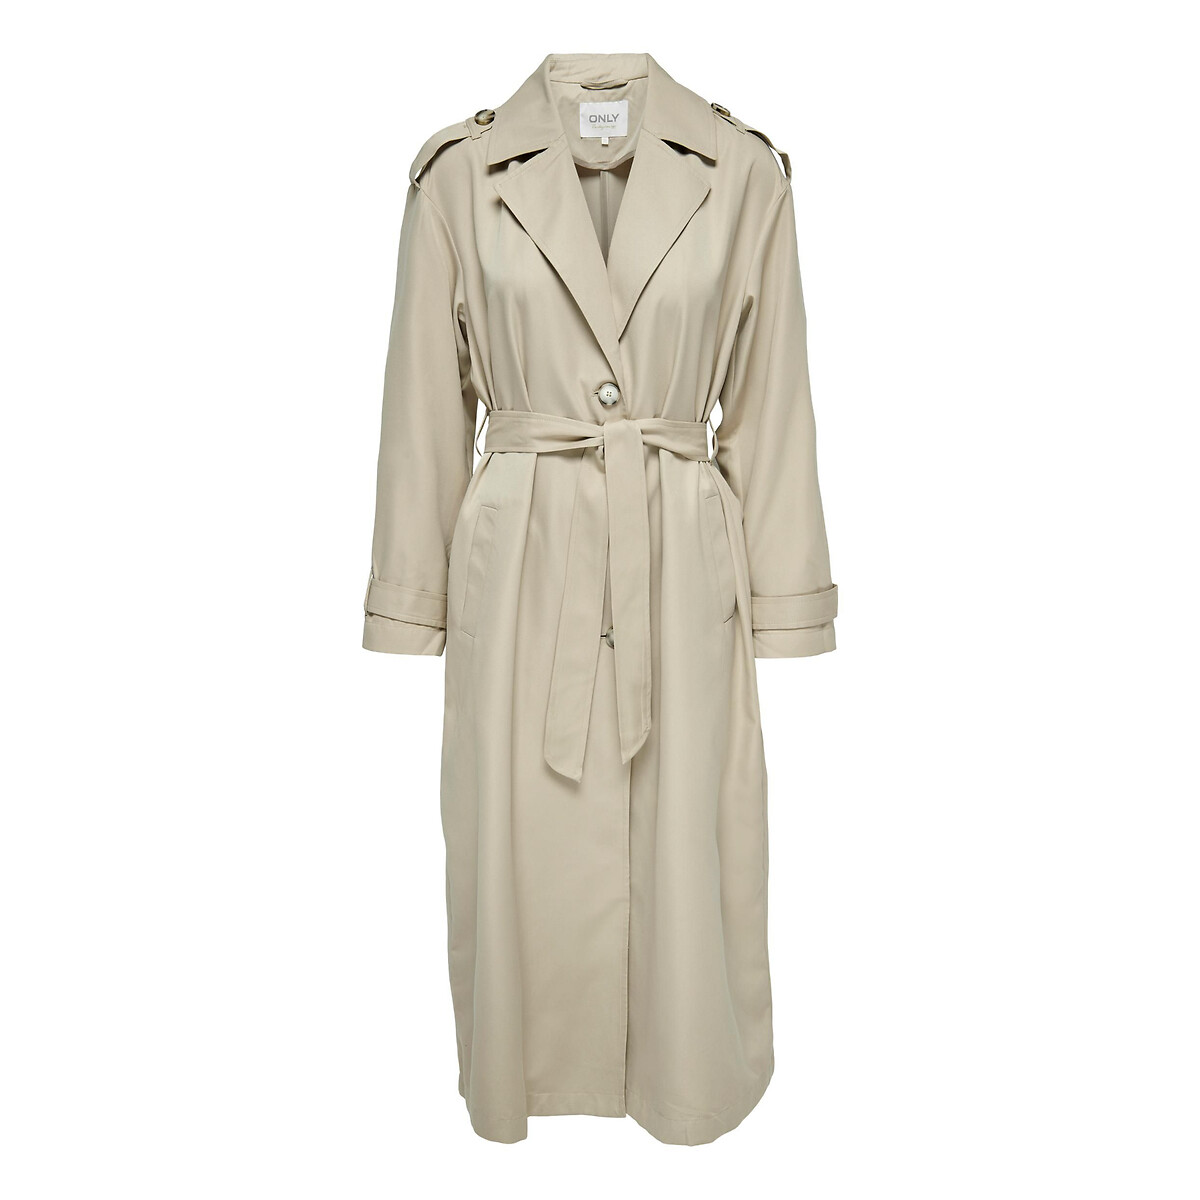 Tie-waist trench coat, taupe, Only Tall | La Redoute